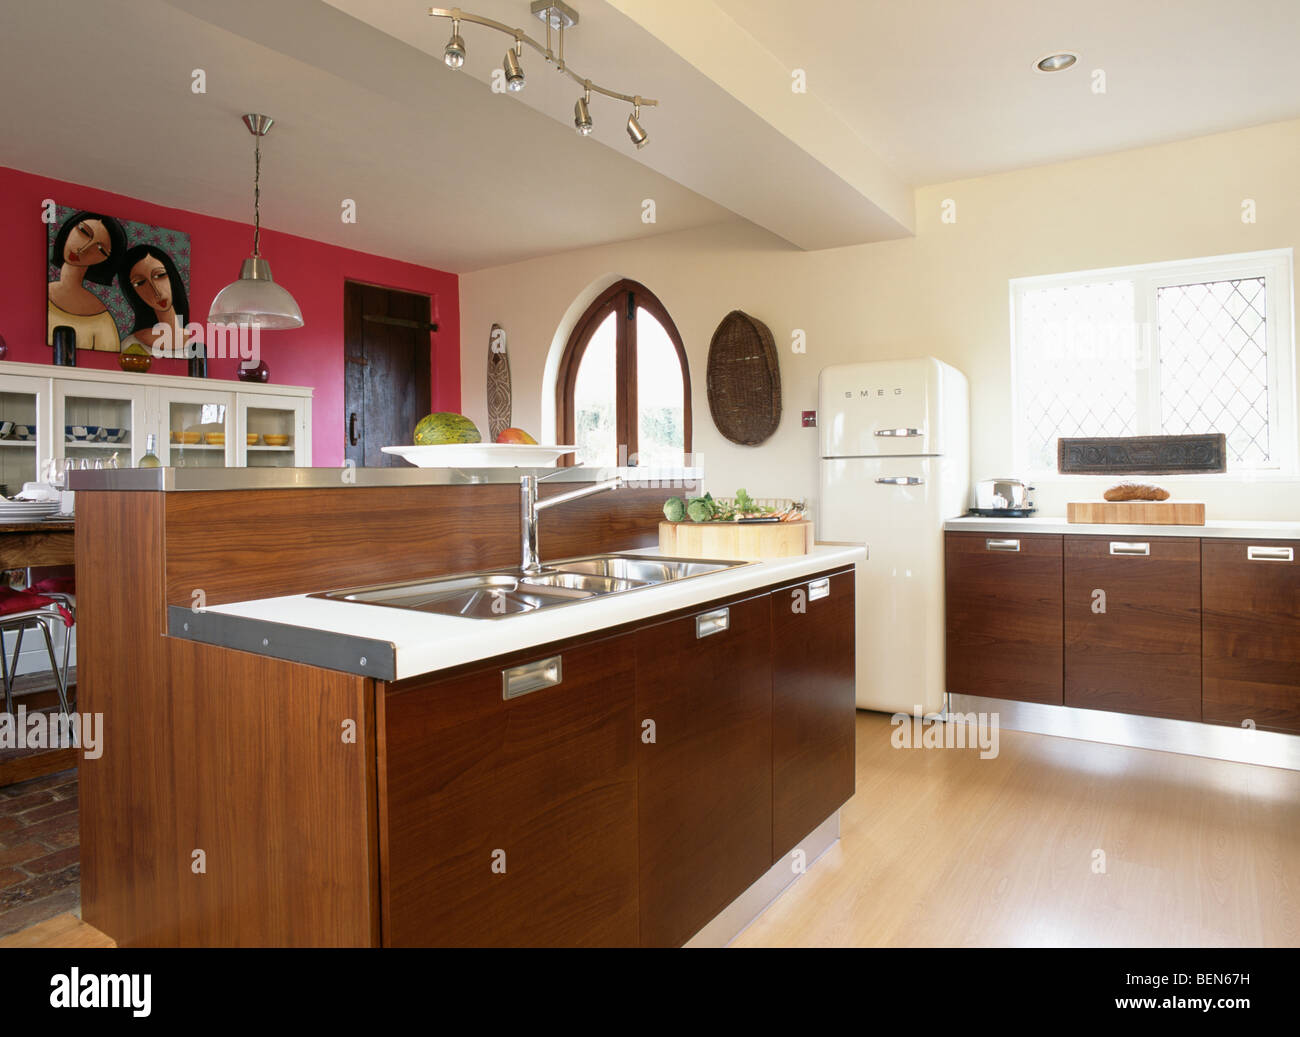 Pink wall in large modern cream kitchen with dark wood units and double stainless-steel sinks in island unit Stock Photo